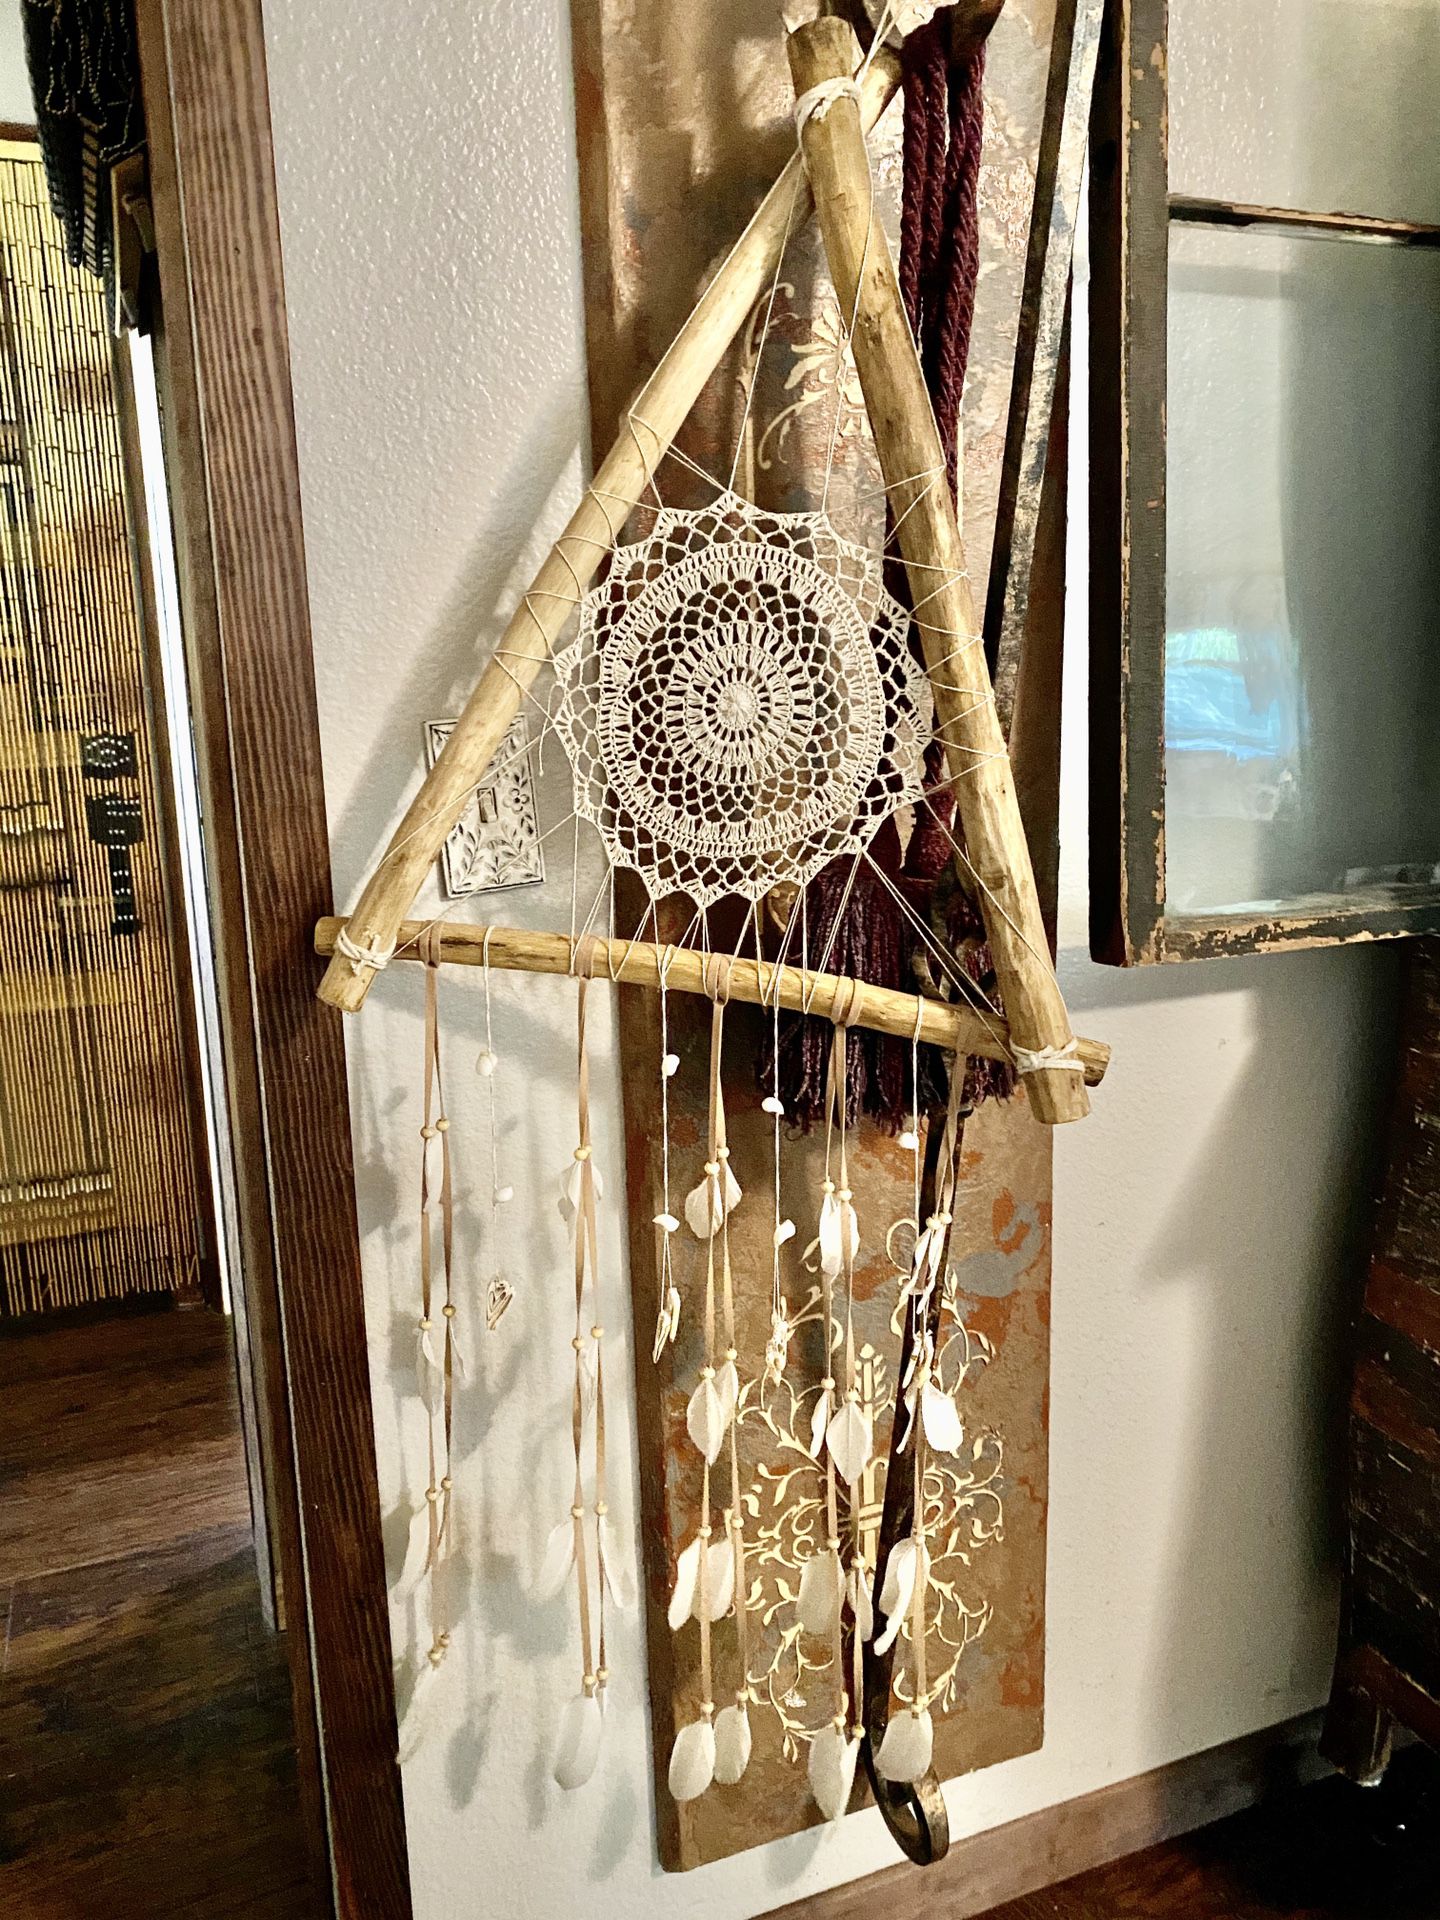 Large handmade Dreamcatcher with feathers